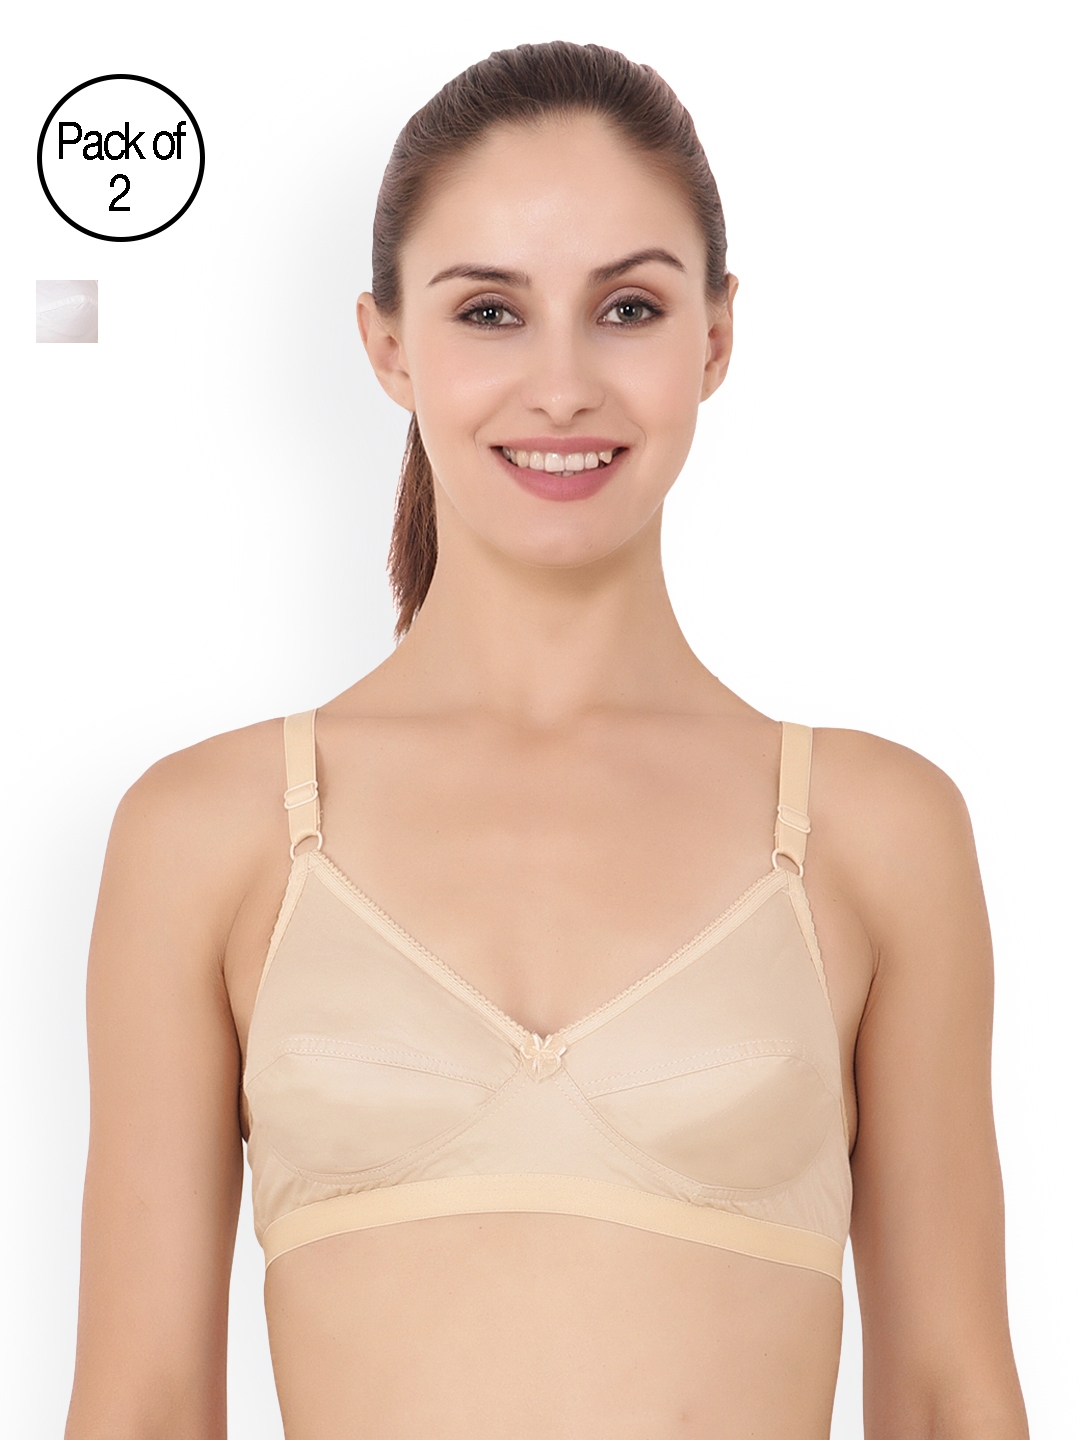 Buy online Pack Of 2 Cotton Sports Bra from lingerie for Women by Abelino  for ₹699 at 65% off